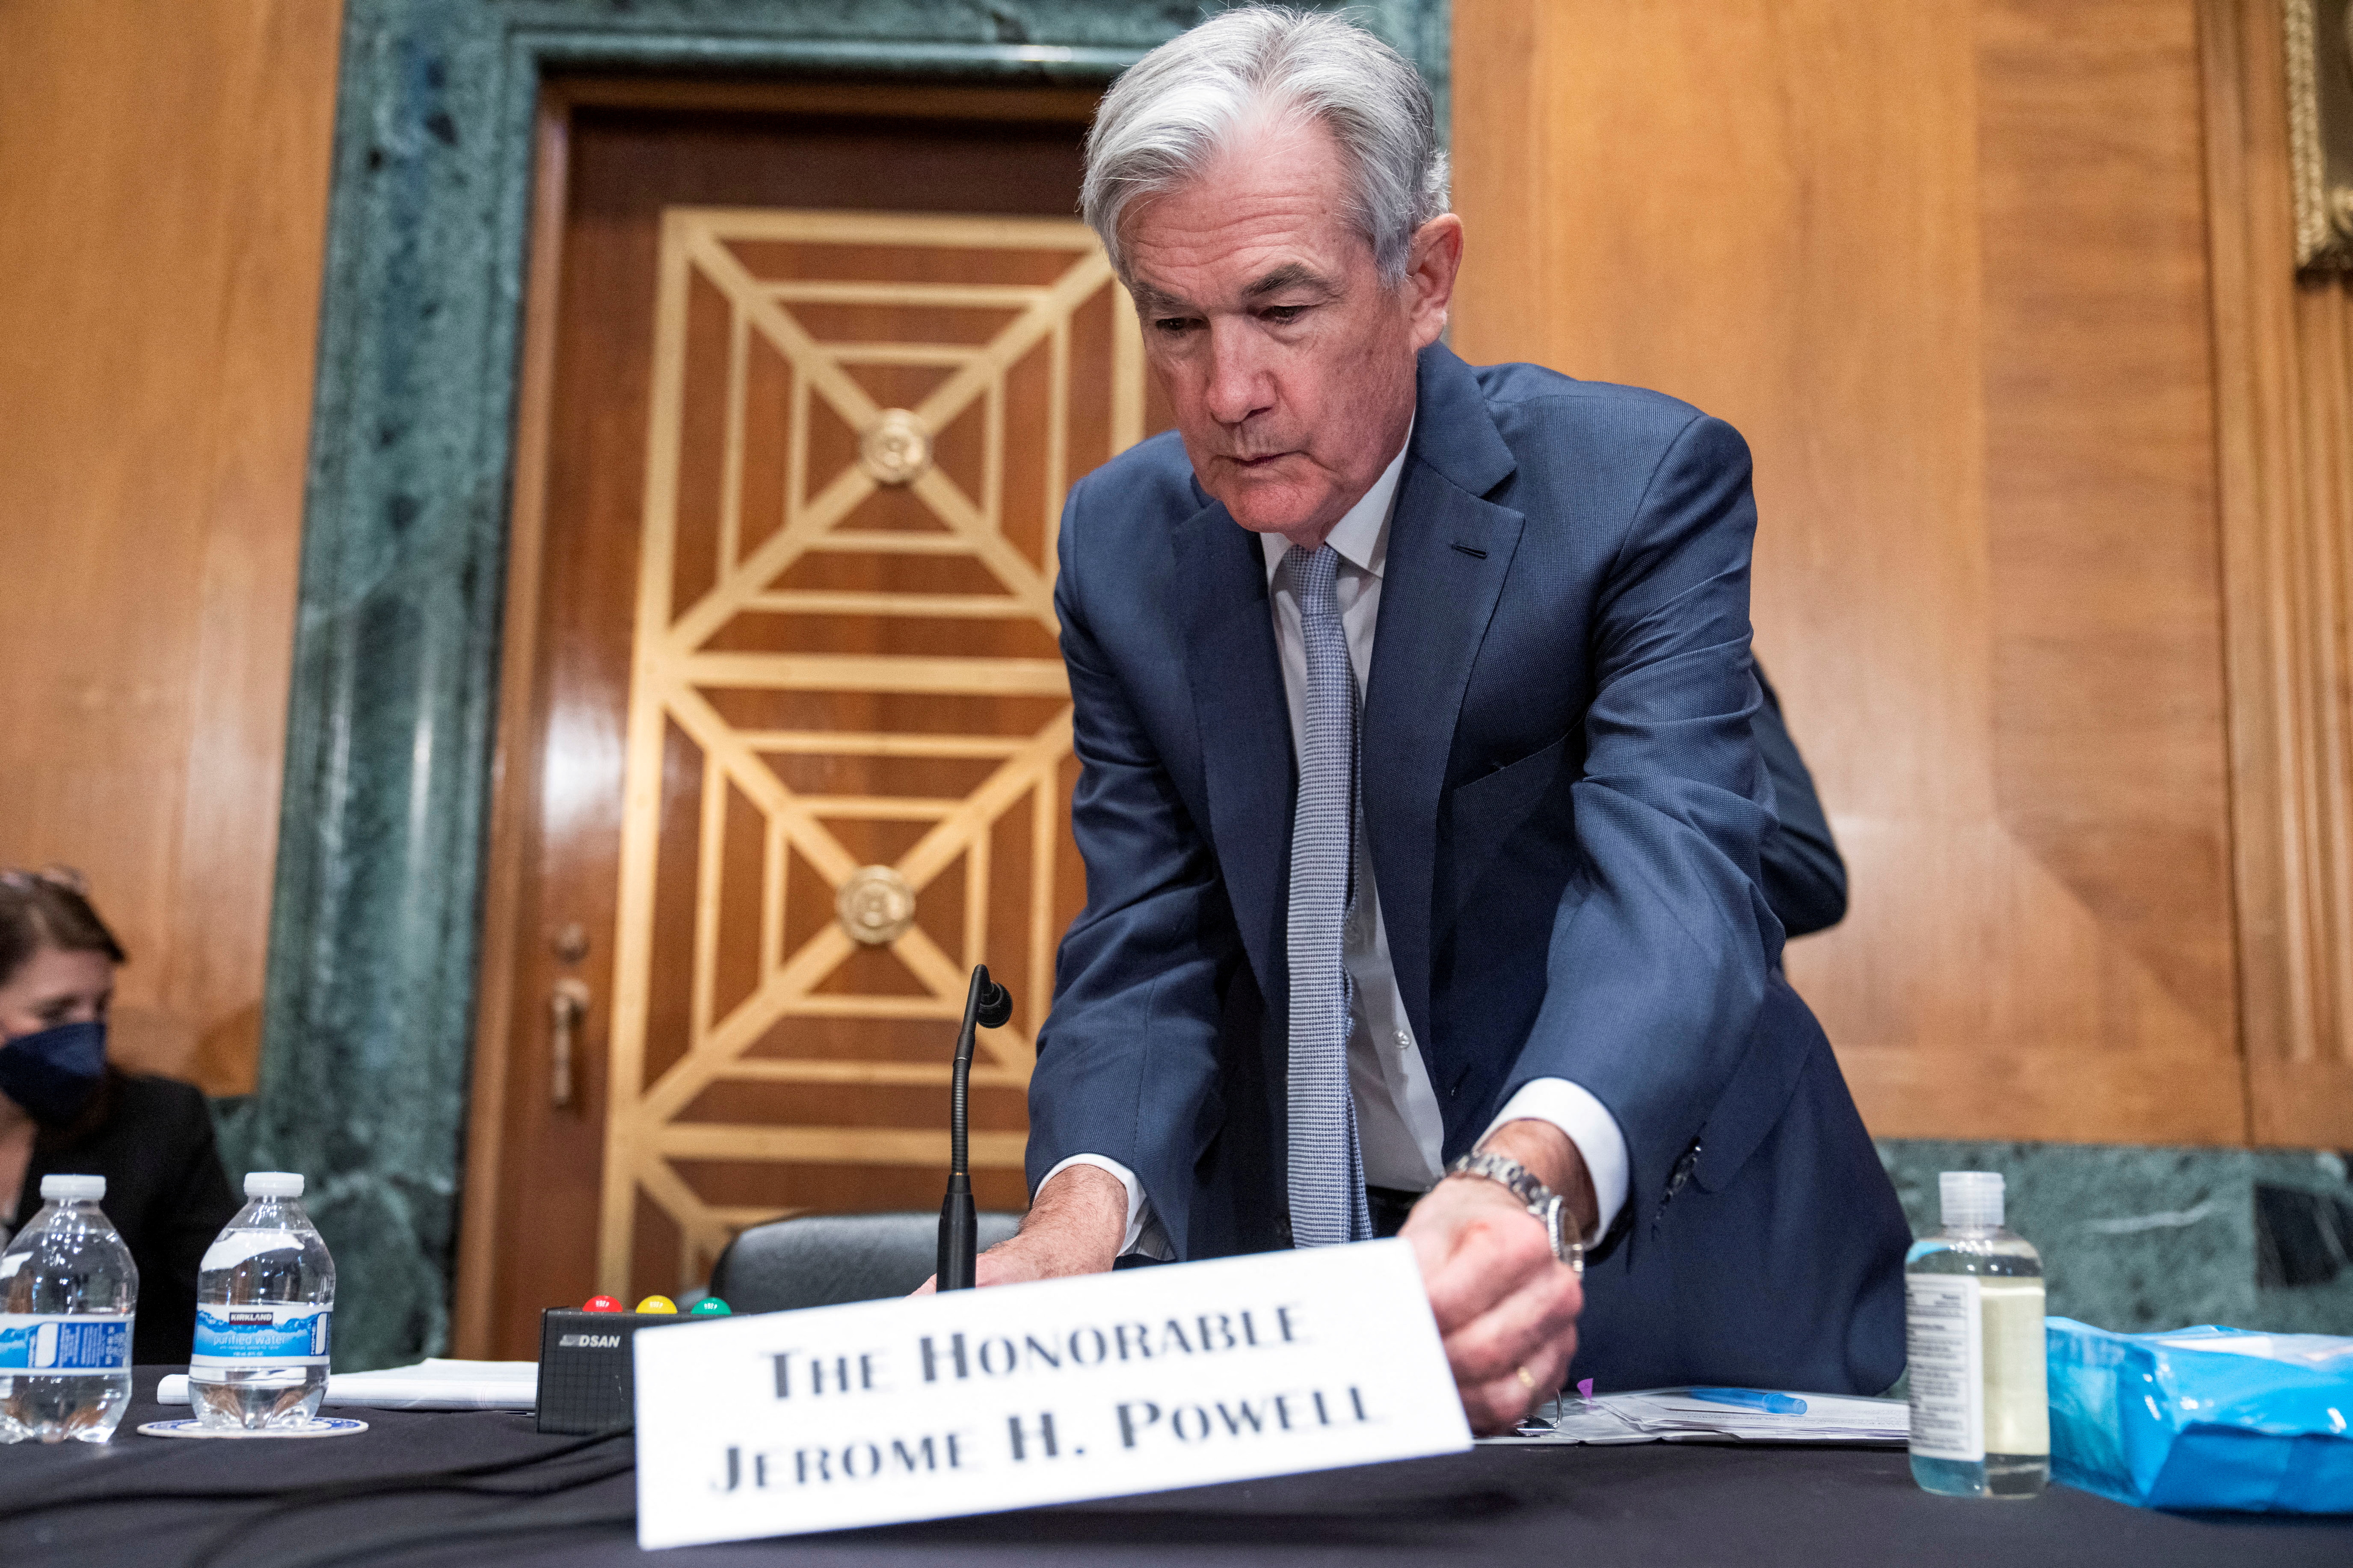 Who is Federal Reserve Chair Jerome Powell and how was he chosen?